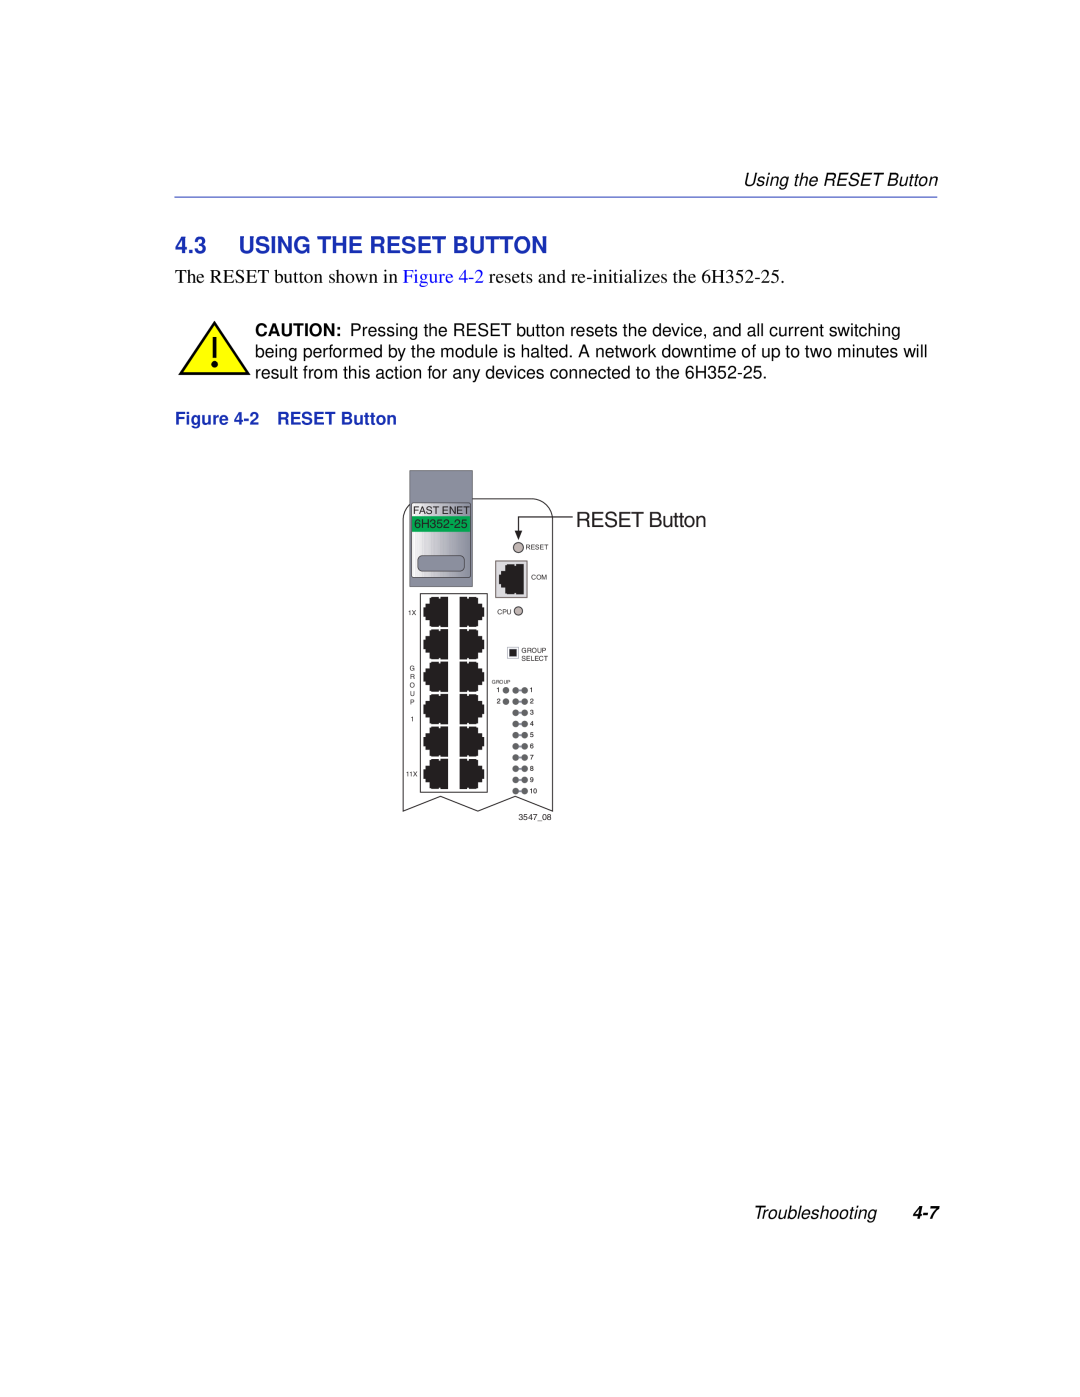 Enterasys Networks 6H352-25 manual Using The Reset Button, Using the RESET Button, 2 RESET Button, Troubleshooting 